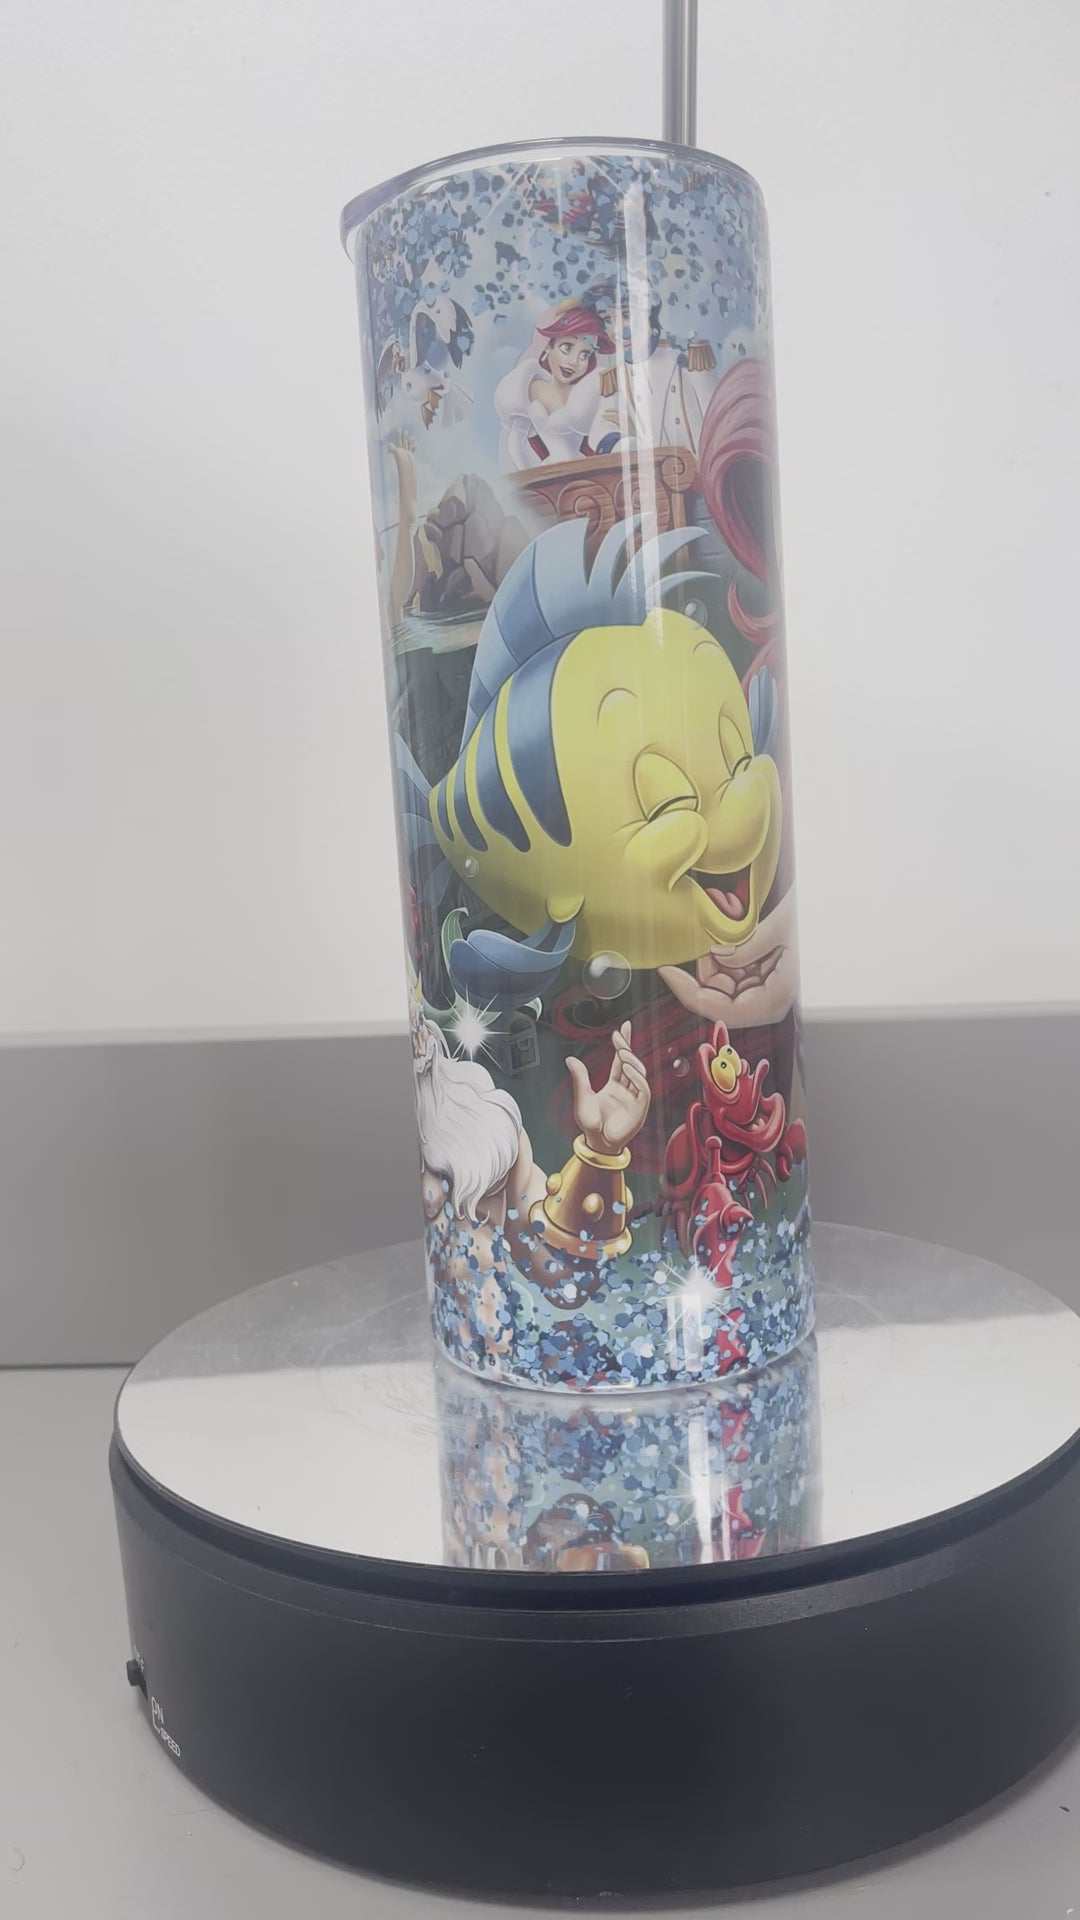 The Little Mermaid Part of Your World Tumbler w/ Sea Shell Ice Cubes